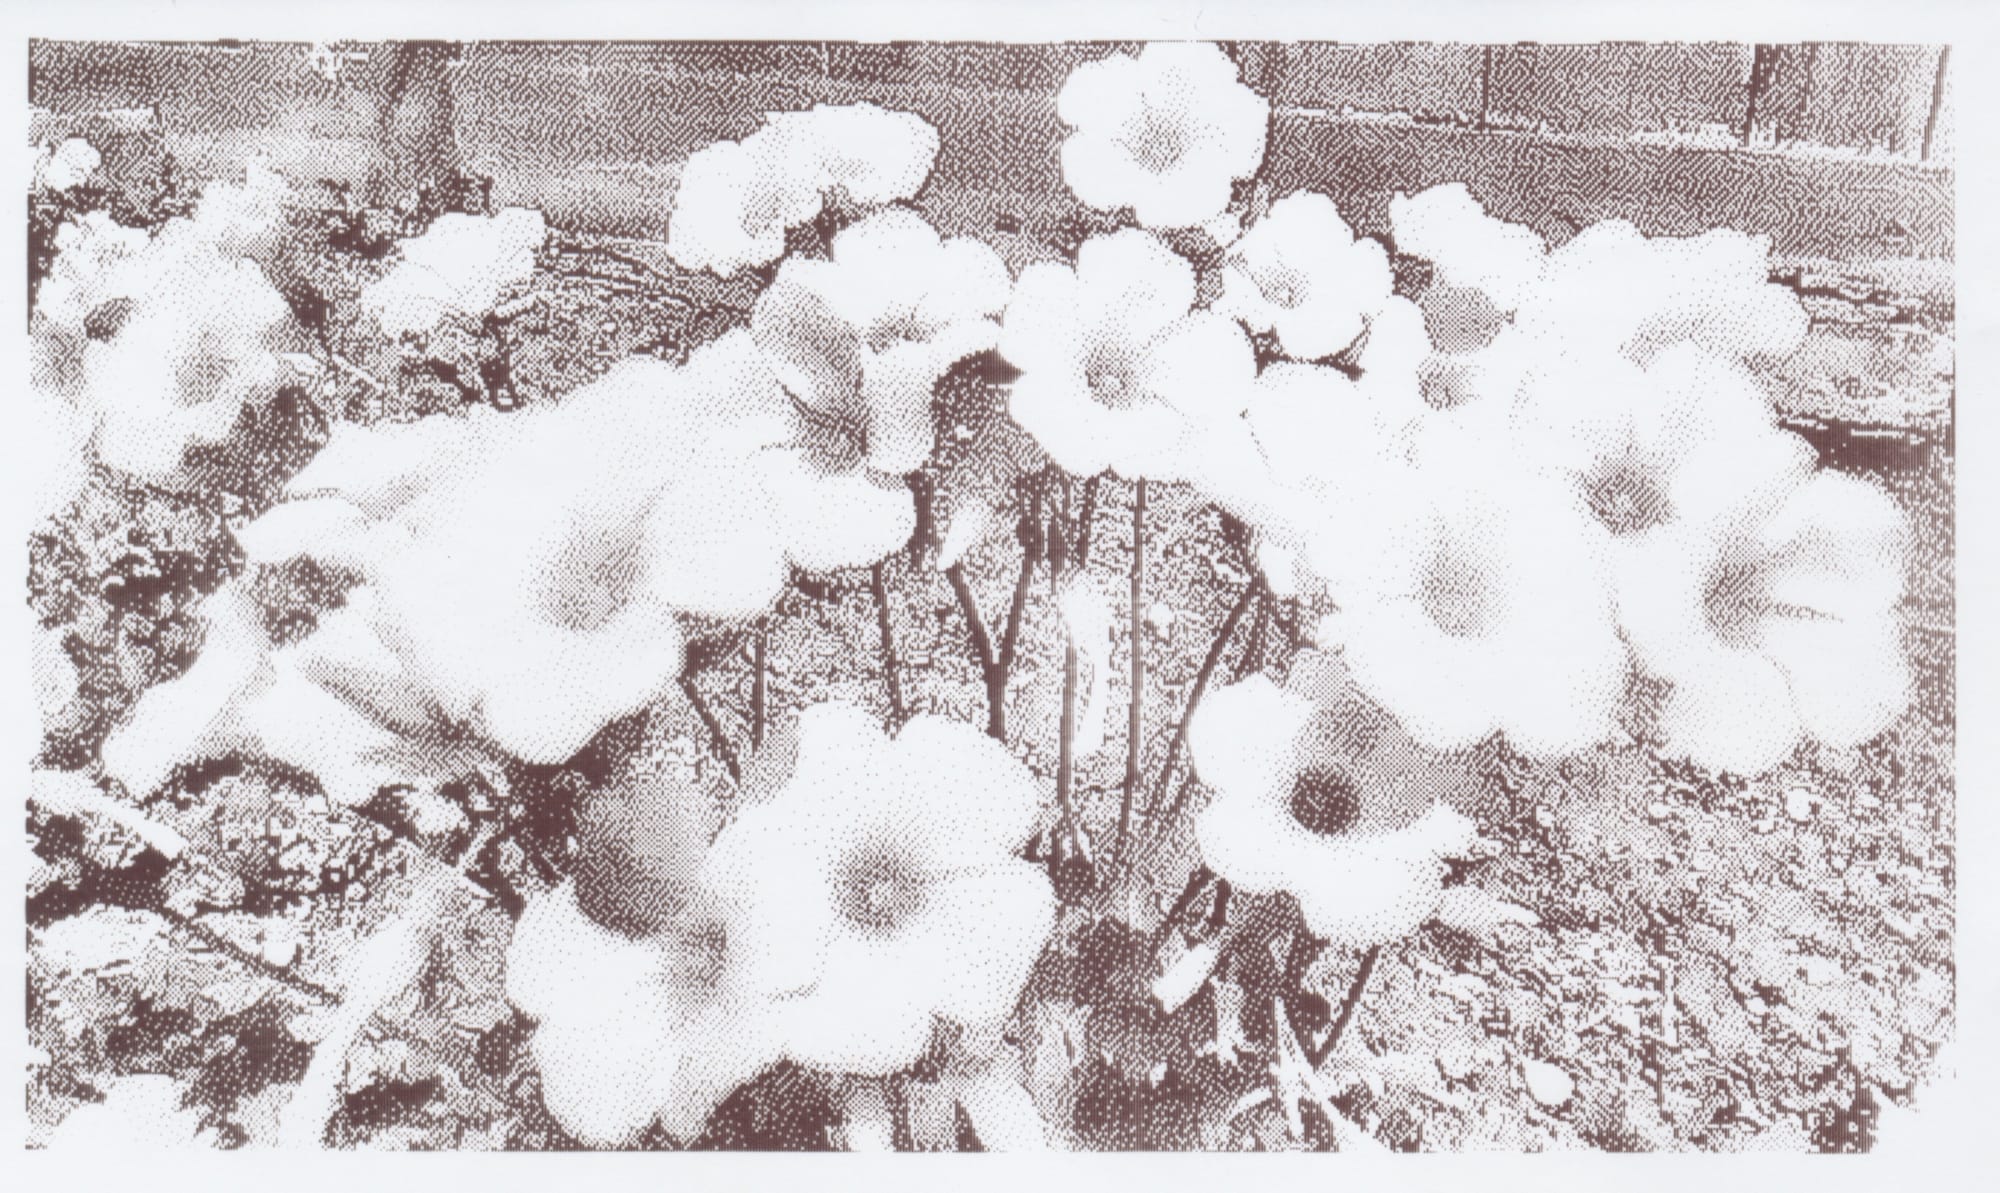 1-bit grayscale thermal print out of an image of small, light colored flowers in front of a backyard fence